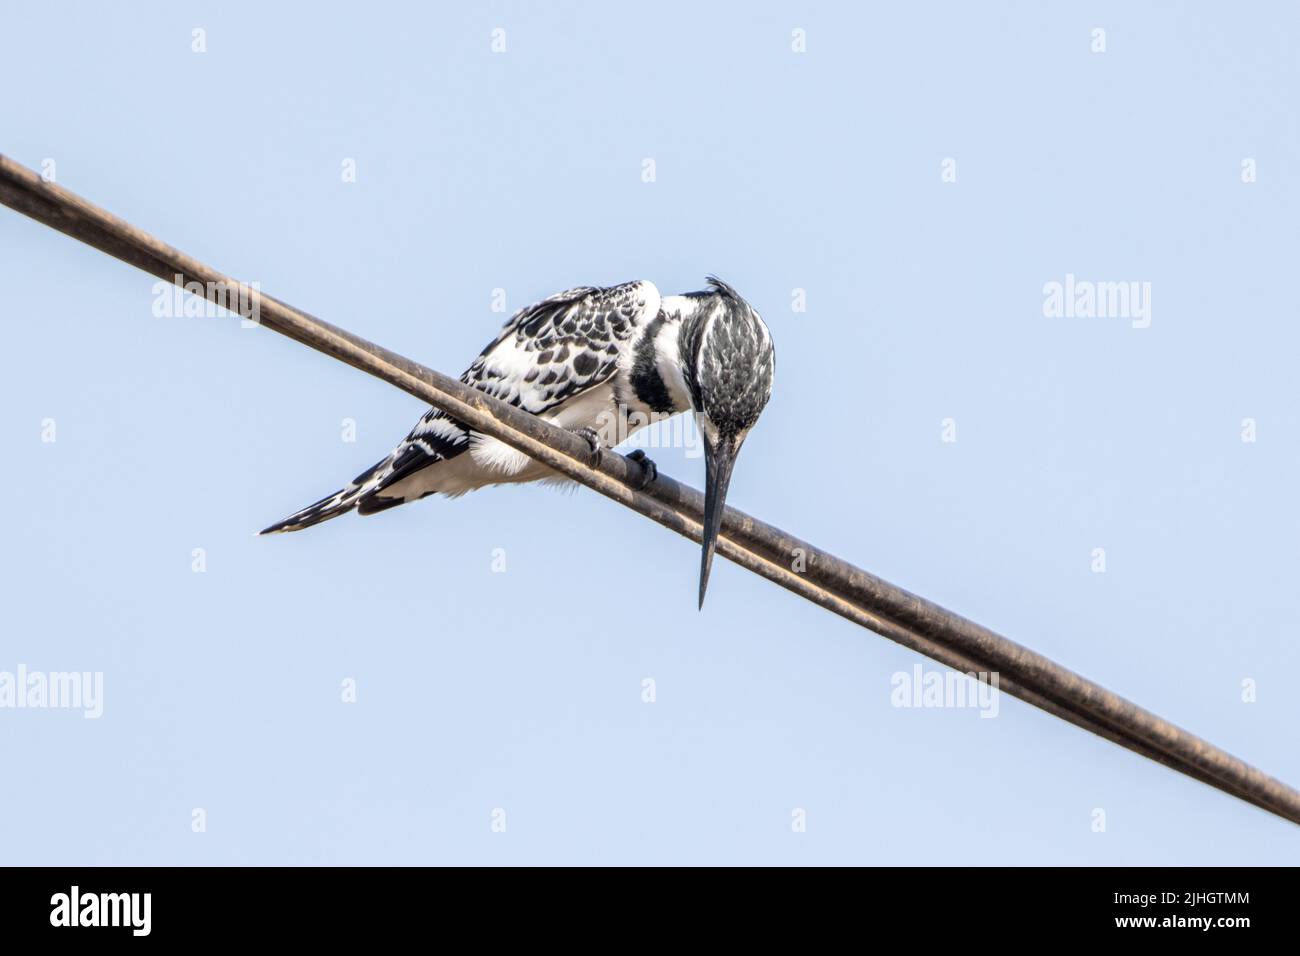 Pied Kingfisher (Ceryle rudis) perched on a wire looking down Stock Photo